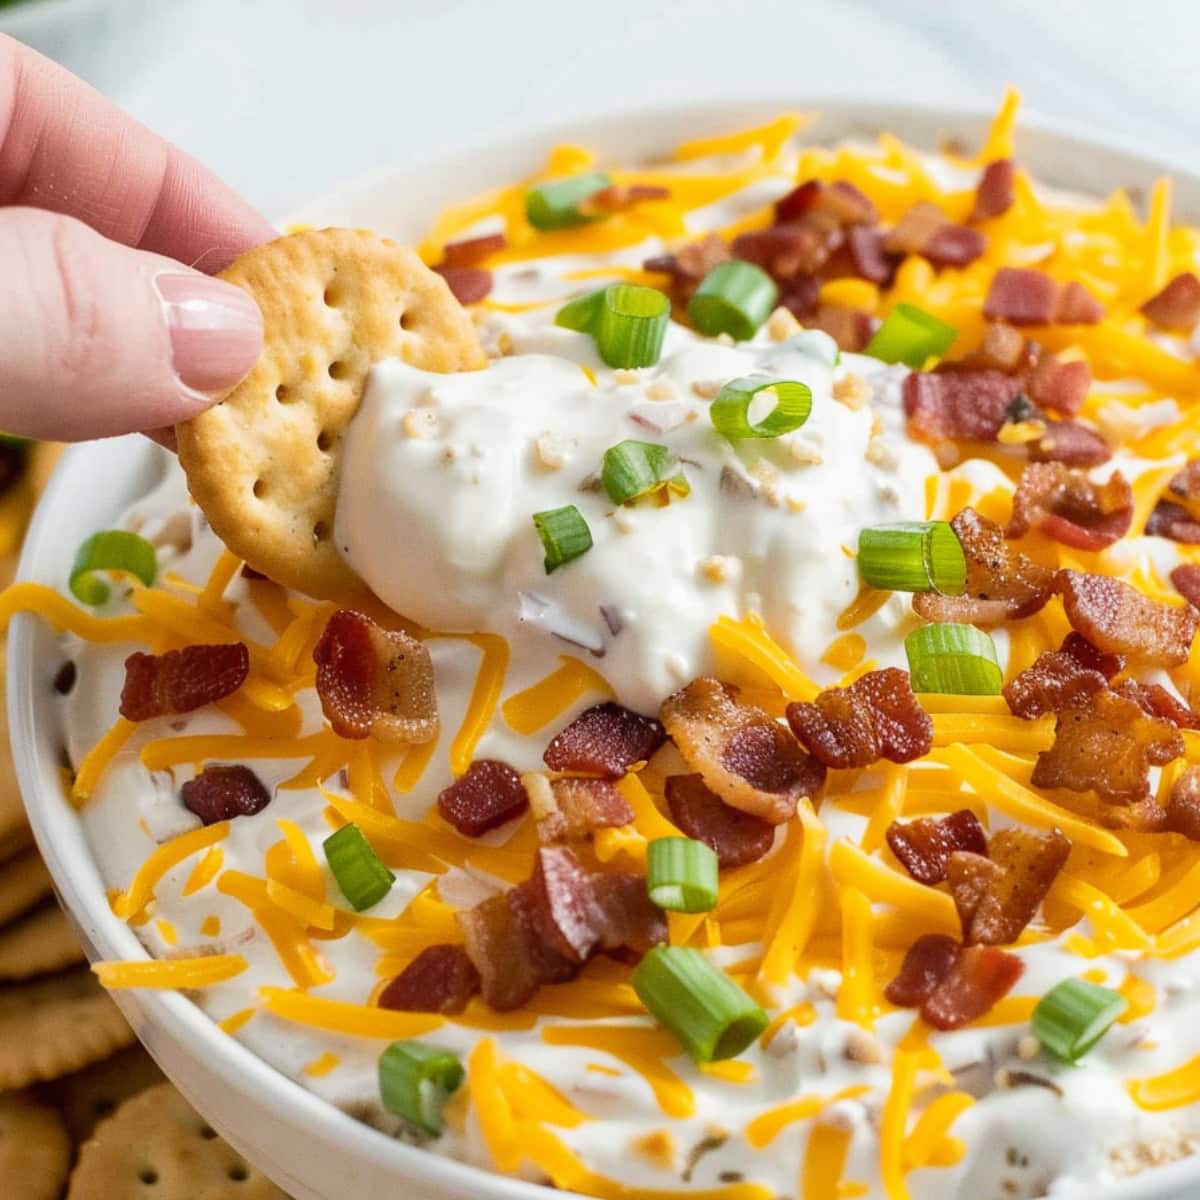 Crackers dipped in a creamy dip made with mixture of sour cream and ranch dressing with crumbled crispy bacon bits, shredded cheddar cheese, sliced green onions on a white bowl